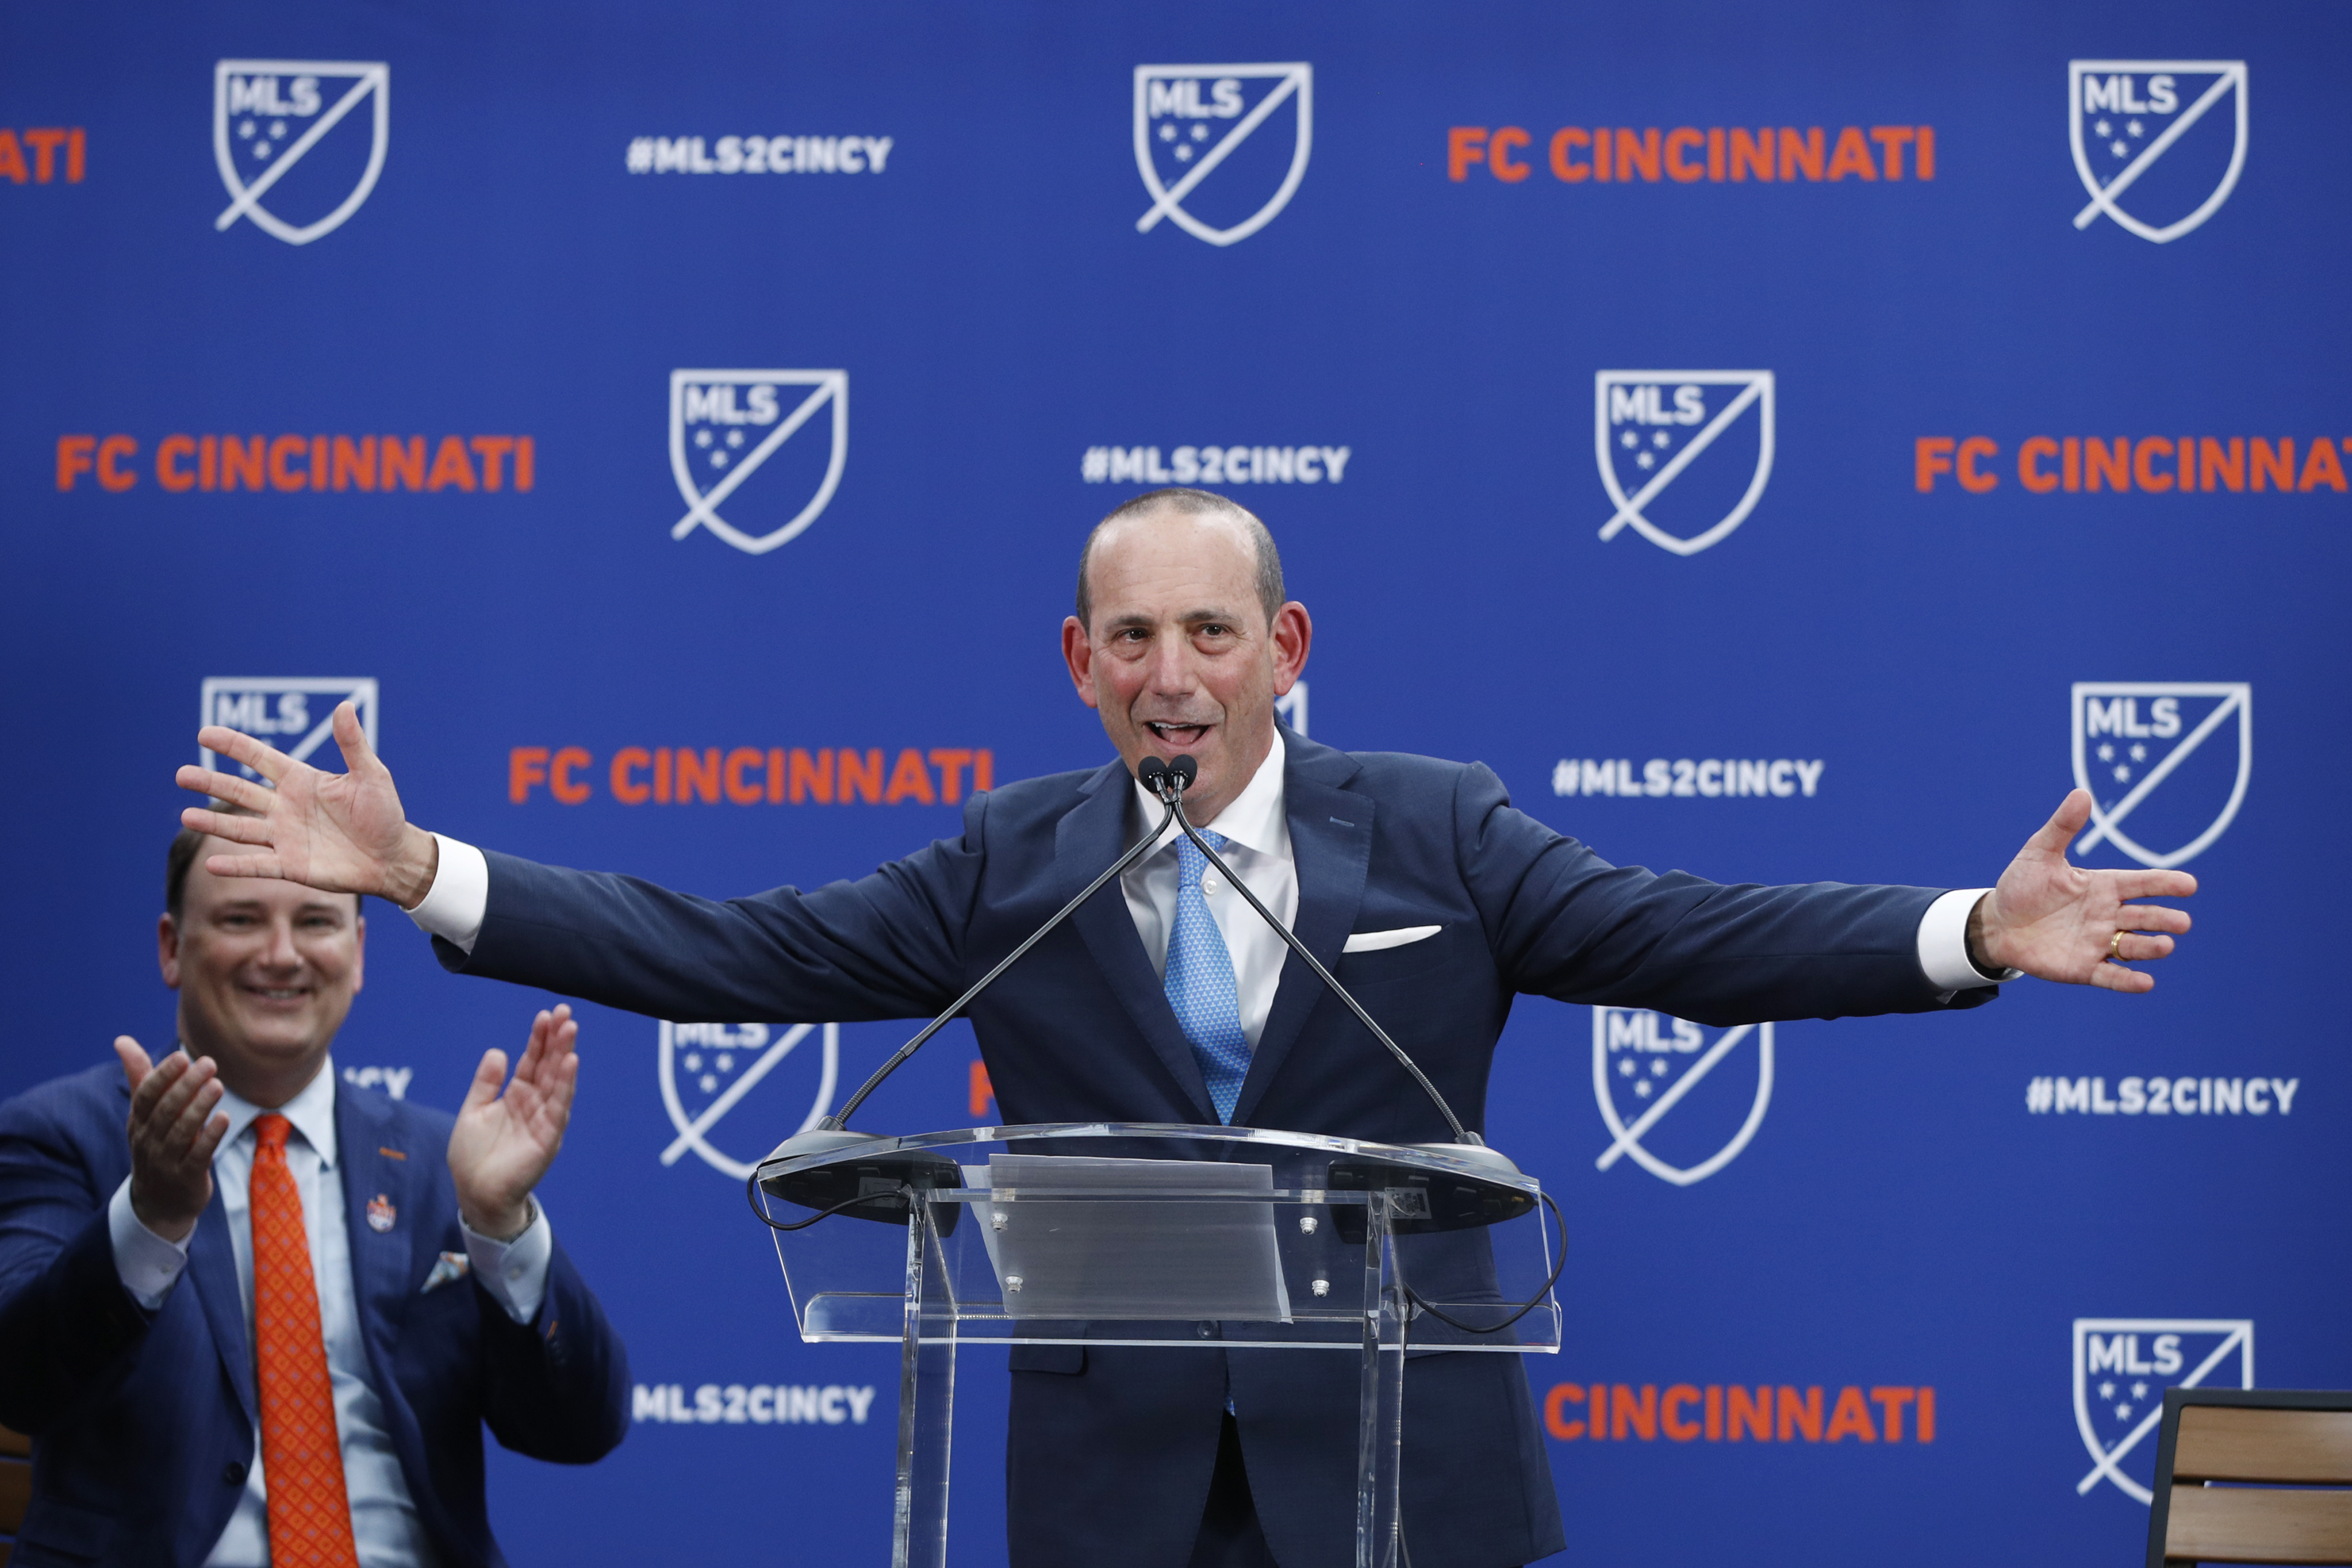 Has MLS expansion come at the expense of the league's established teams?, MLS